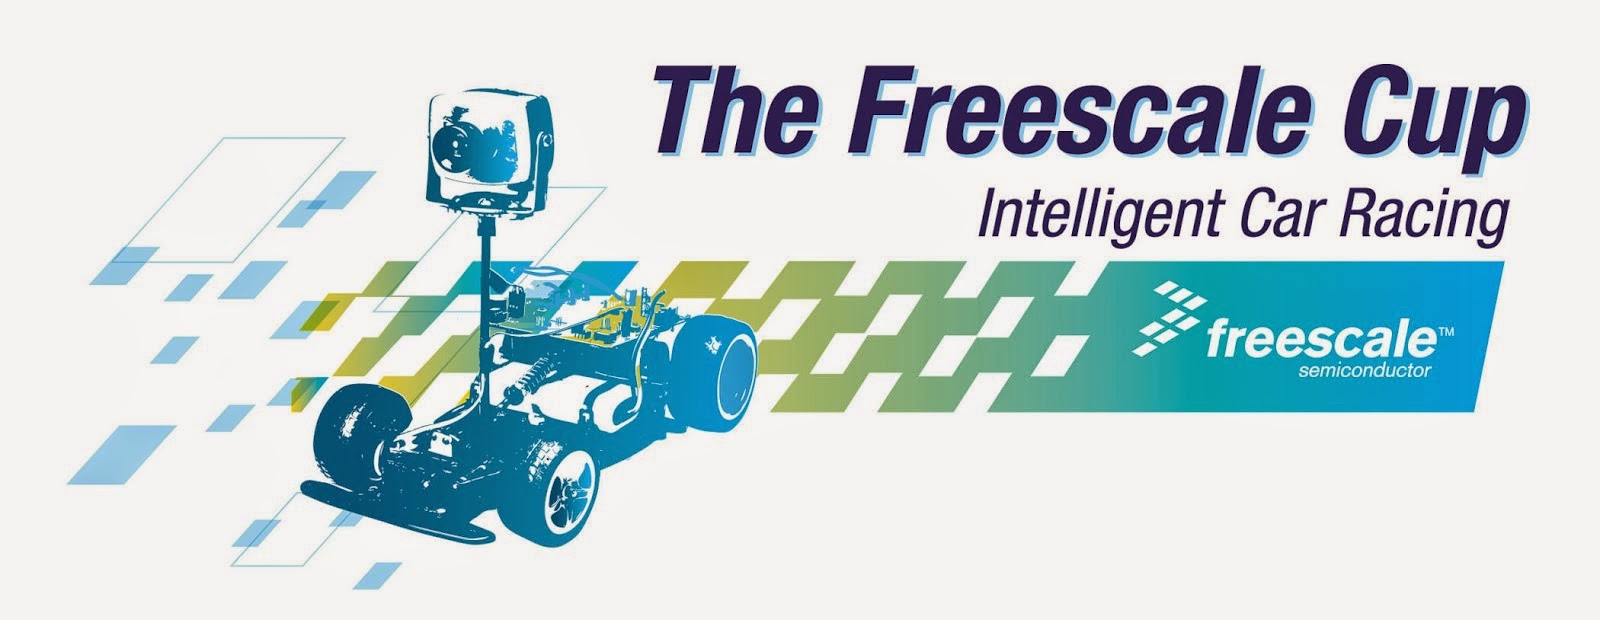 The Freescale Cup